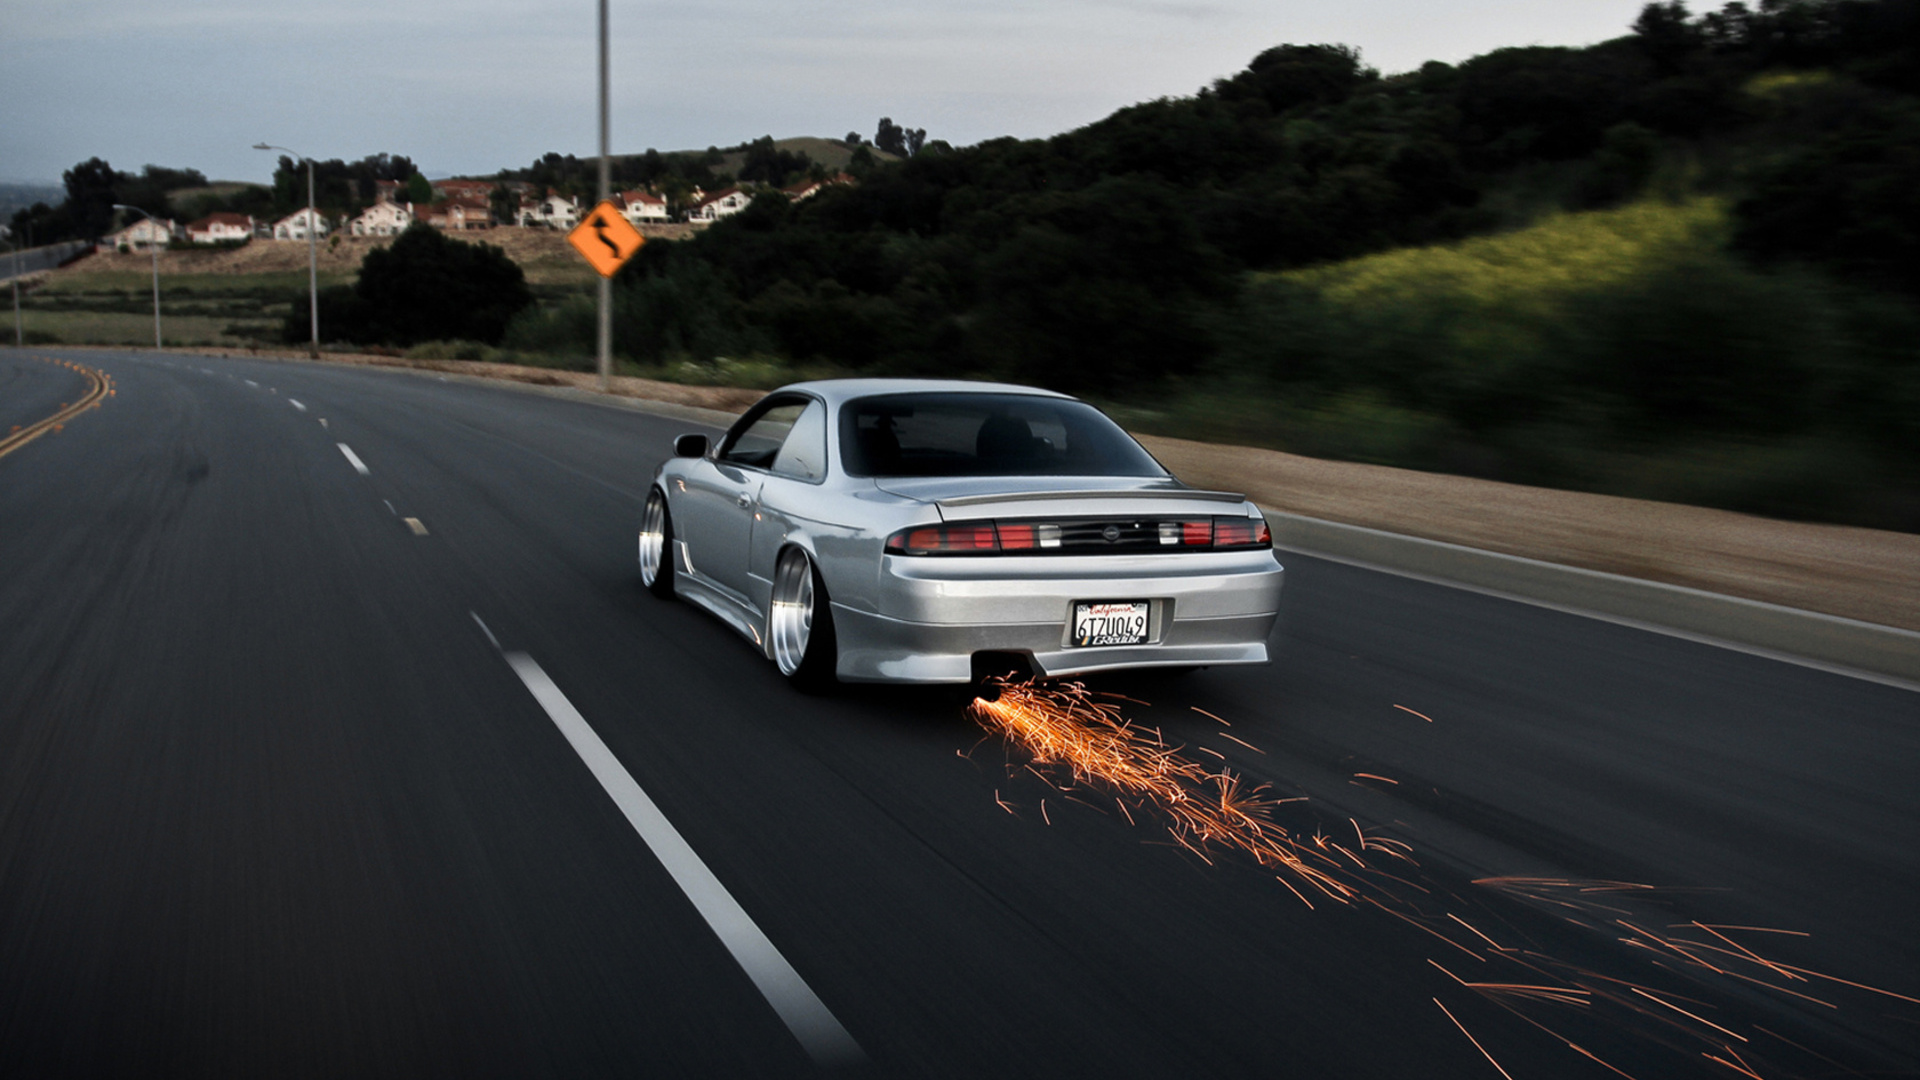 nissan, Vehicles, Cars, Auto, Tuning, Stance, Roads, Sparks, Fire, Low, Silver, Wheels Wallpaper